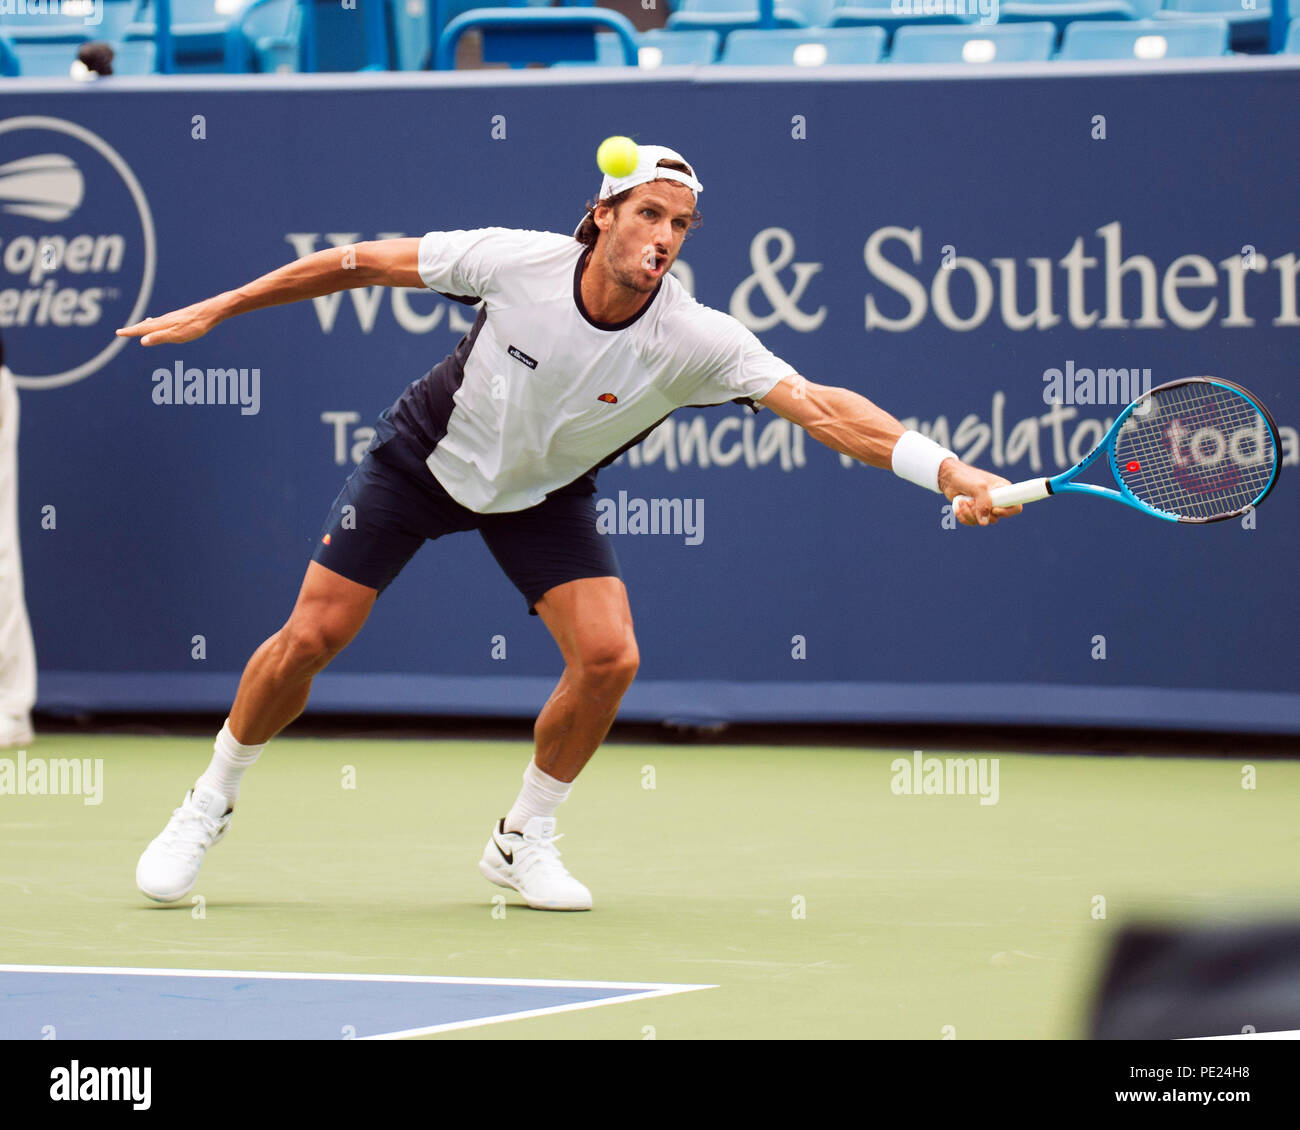 Ohio, USA. August 11, 2018: Feliciano Lopez ( ESP) hits the ball back to Marcos Baghdatis (CYP) at the Western Southern Open in Mason, Ohio, USA. Brent Clark/Alamy Live News Stock Photo